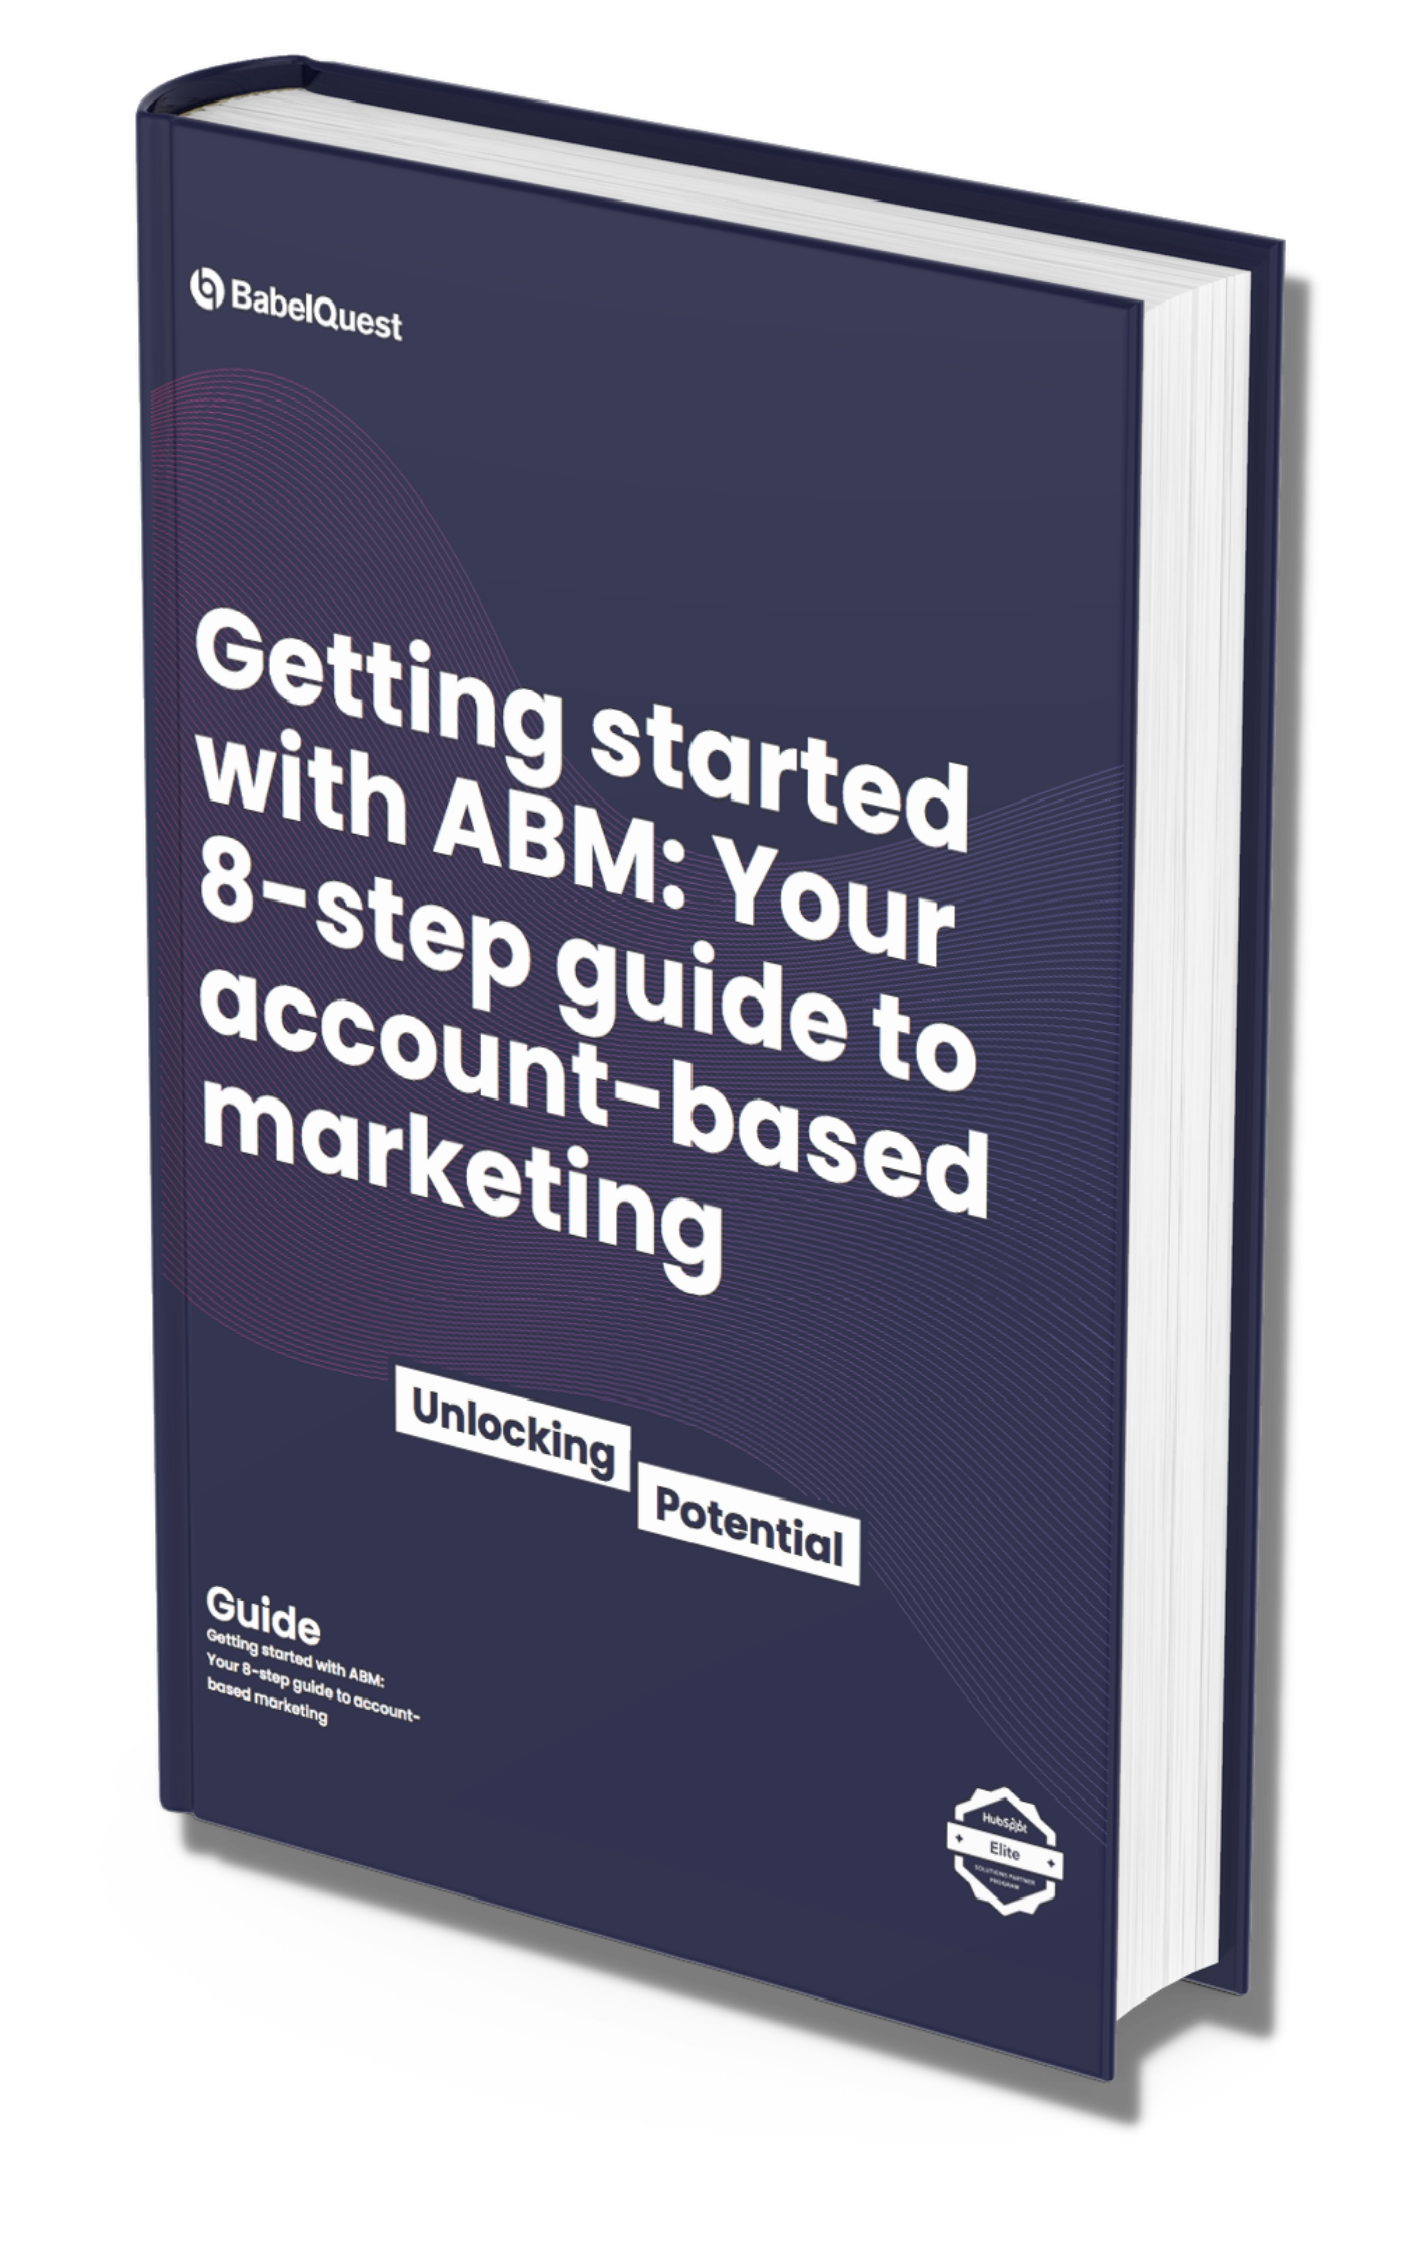 offer-ebook-getting-started-with-abm-account-based-marketing